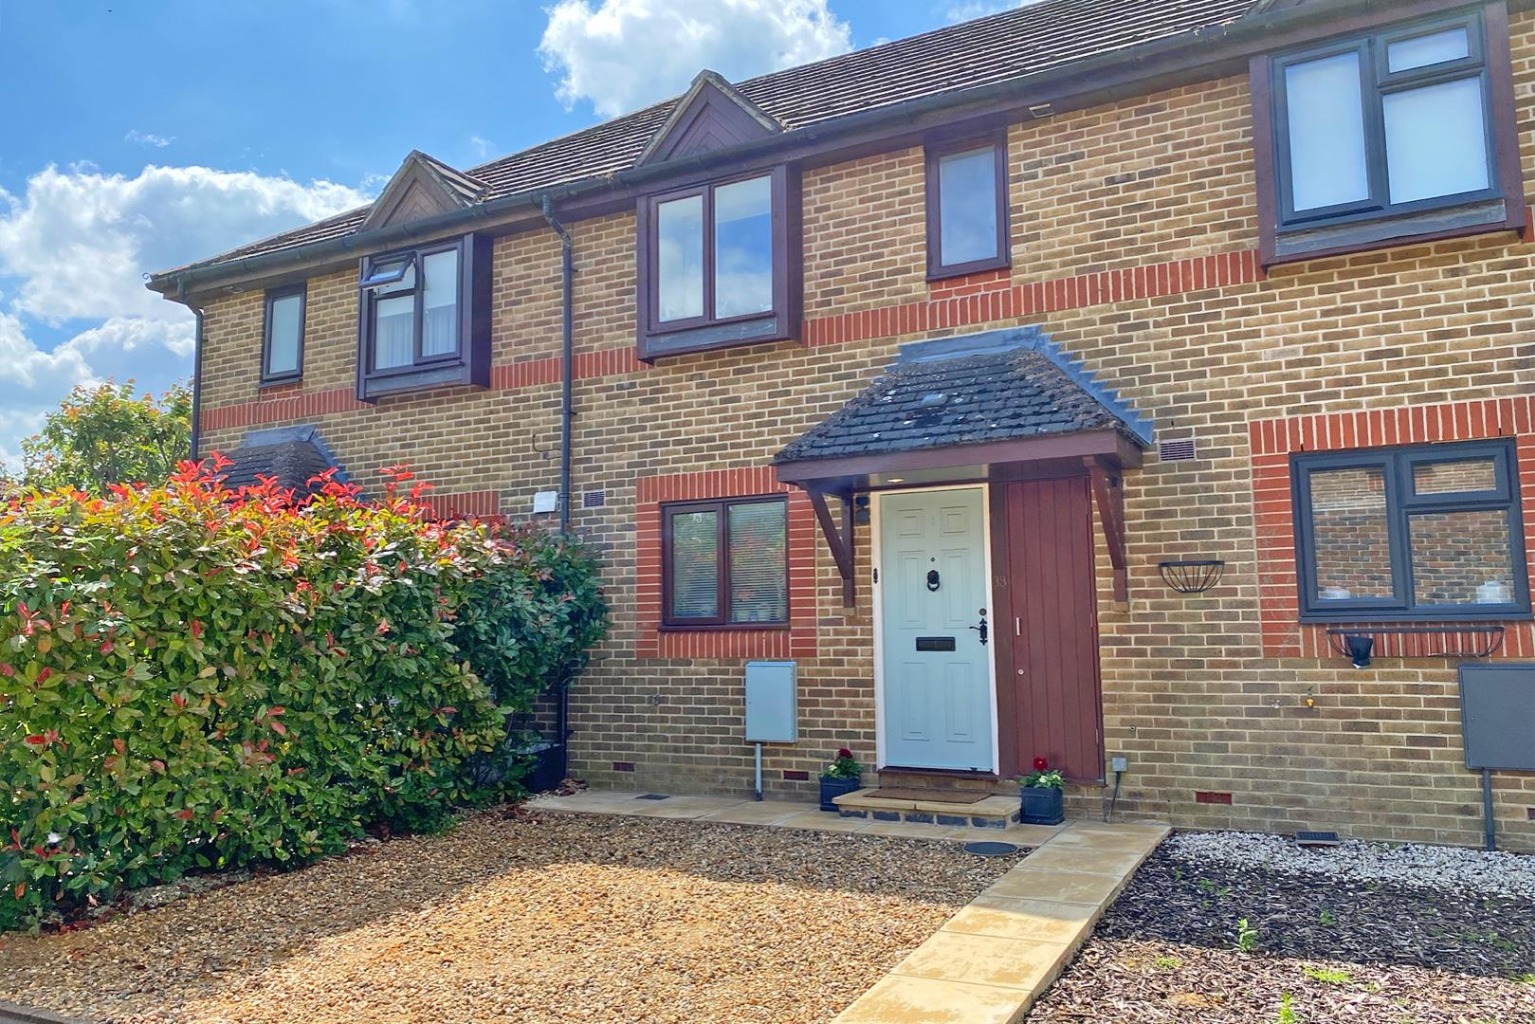 2 bed terraced house for sale in All Saints Rise, Bracknell, RG42